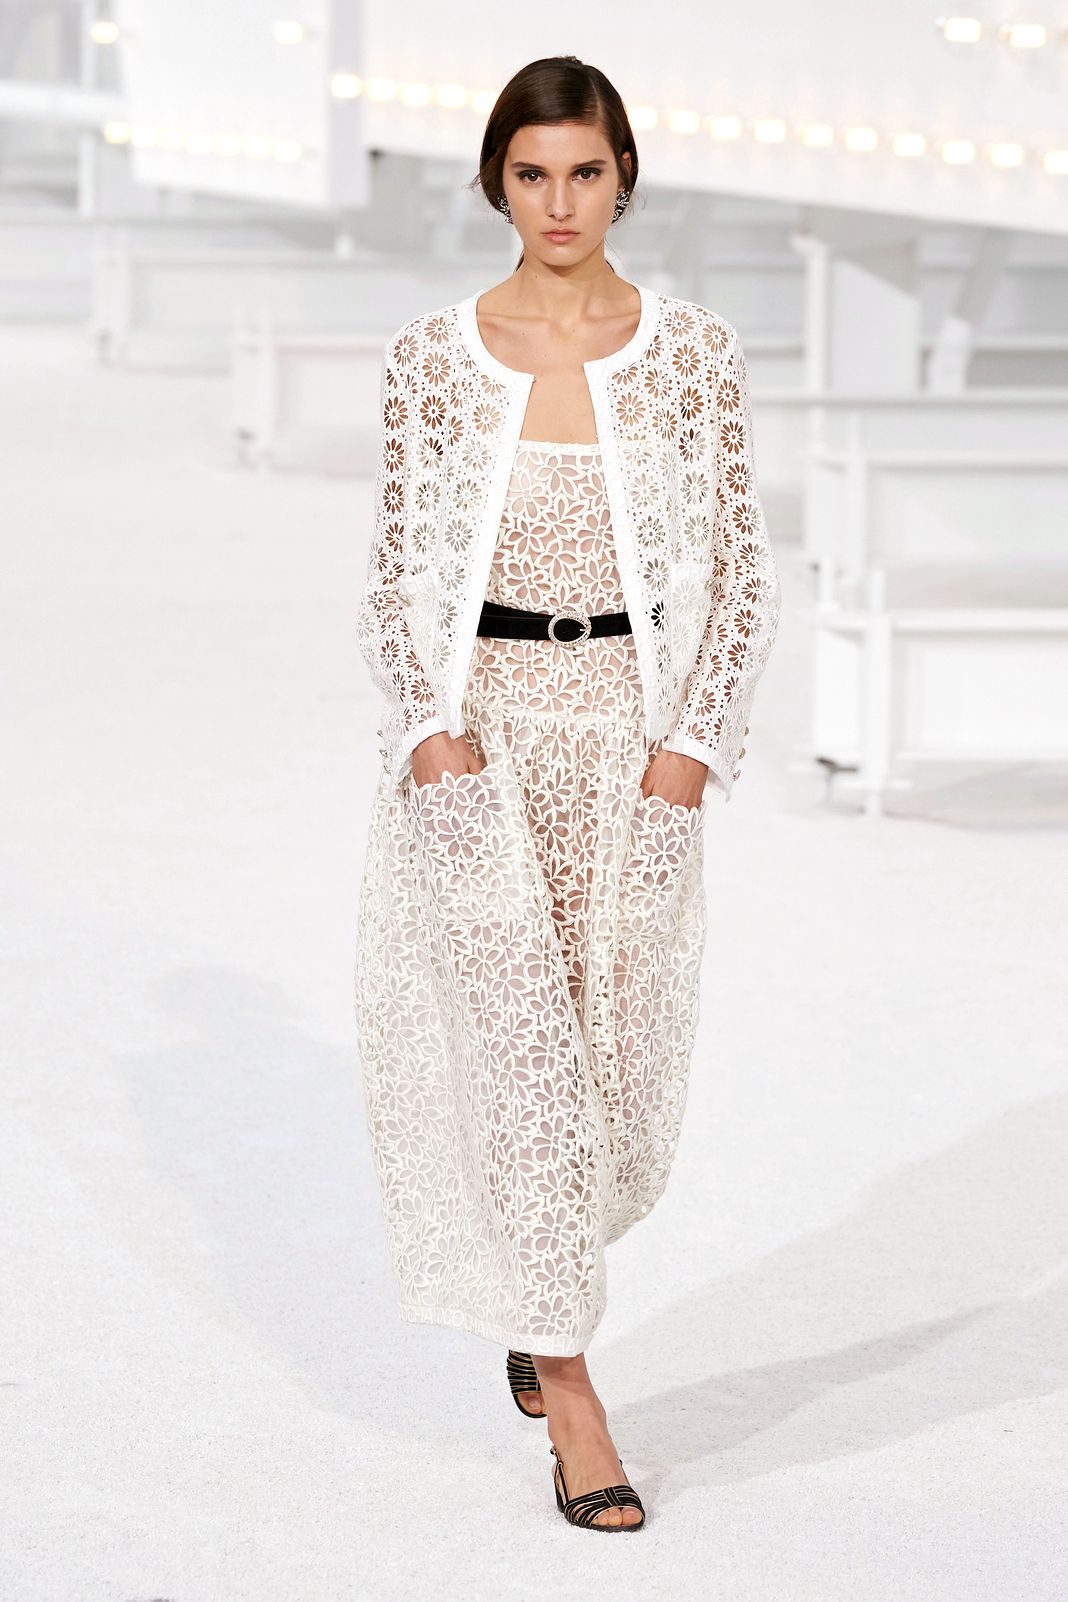 Chanel S/S 2021 Ready-to-Wear Collection